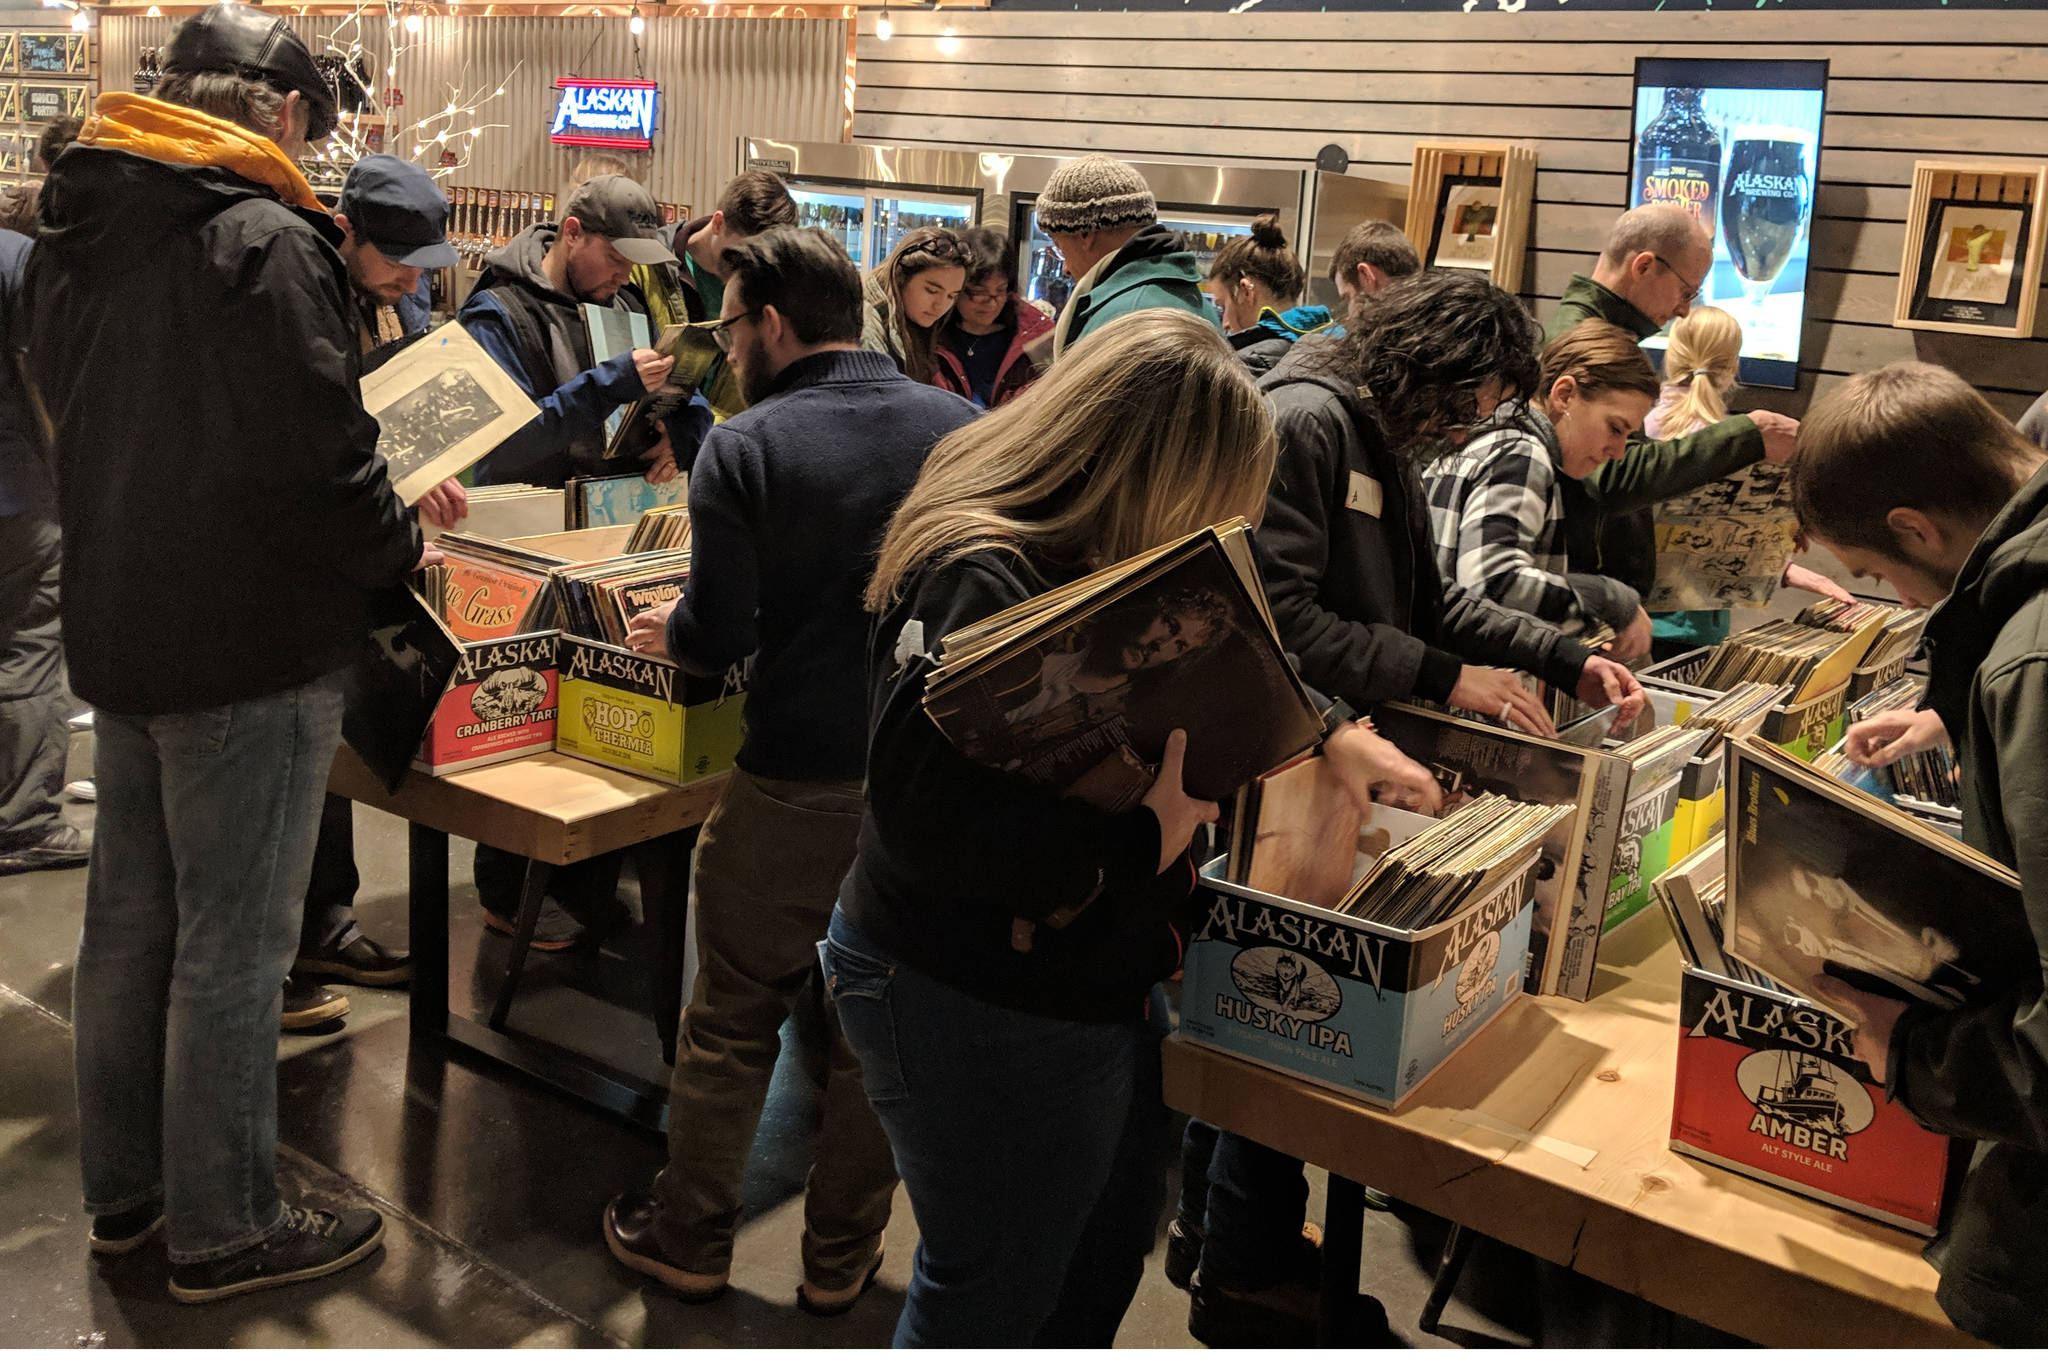 Hit records: Vinyl shop sells out fast